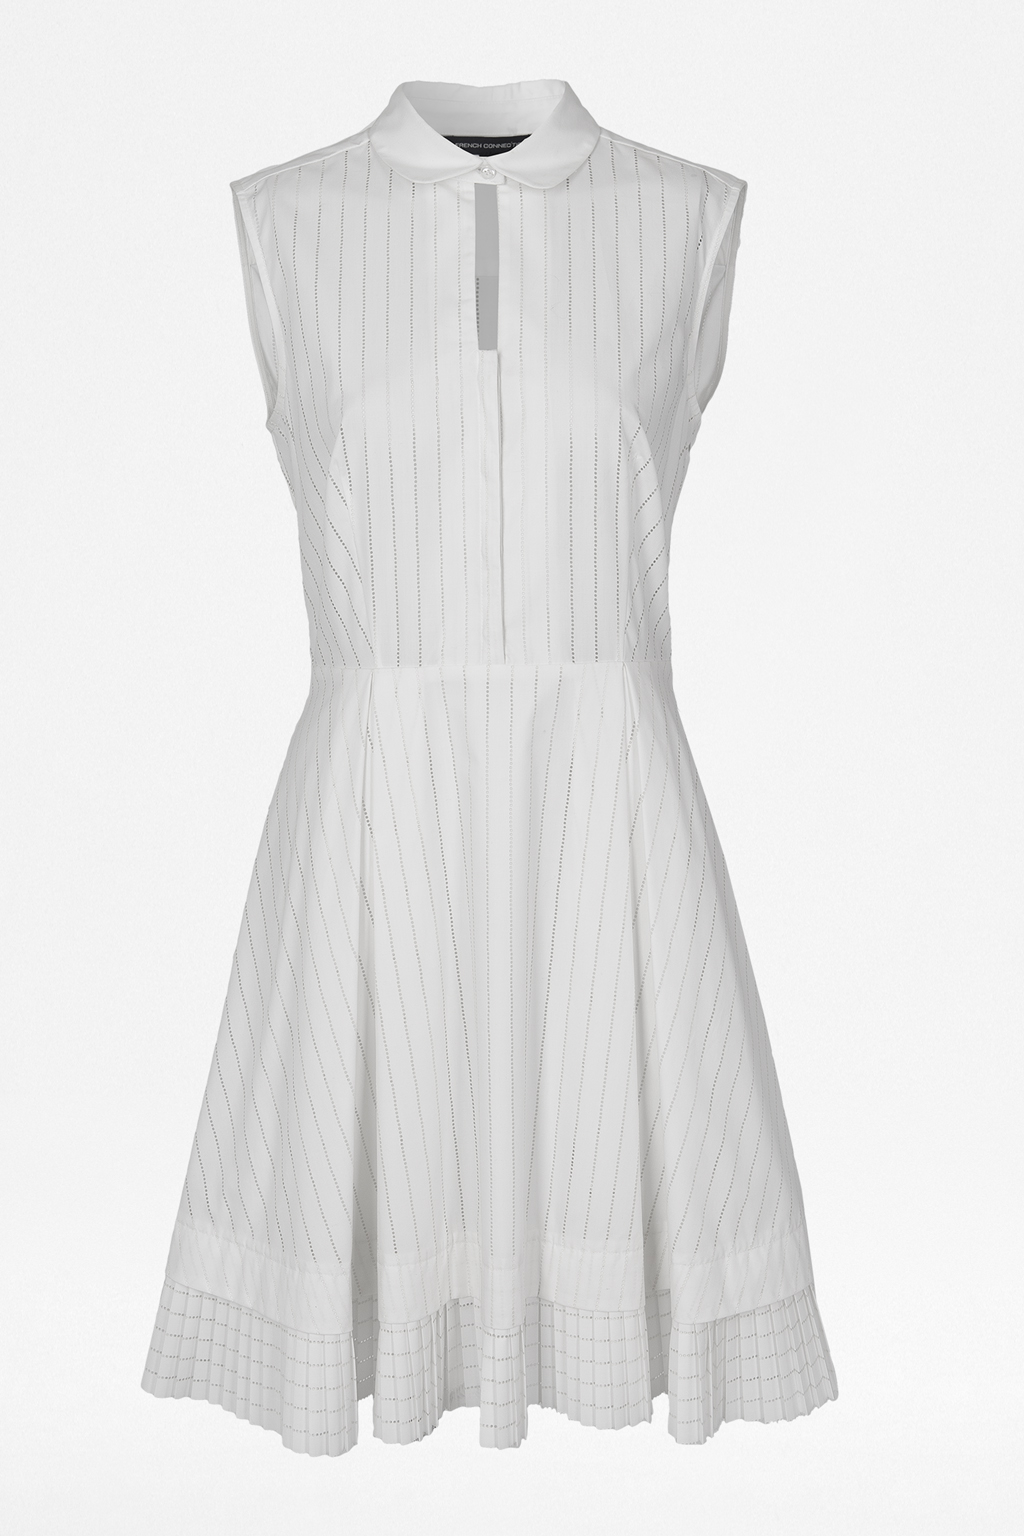 Lyst - French connection Pixel Cotton Shirt Dress in White